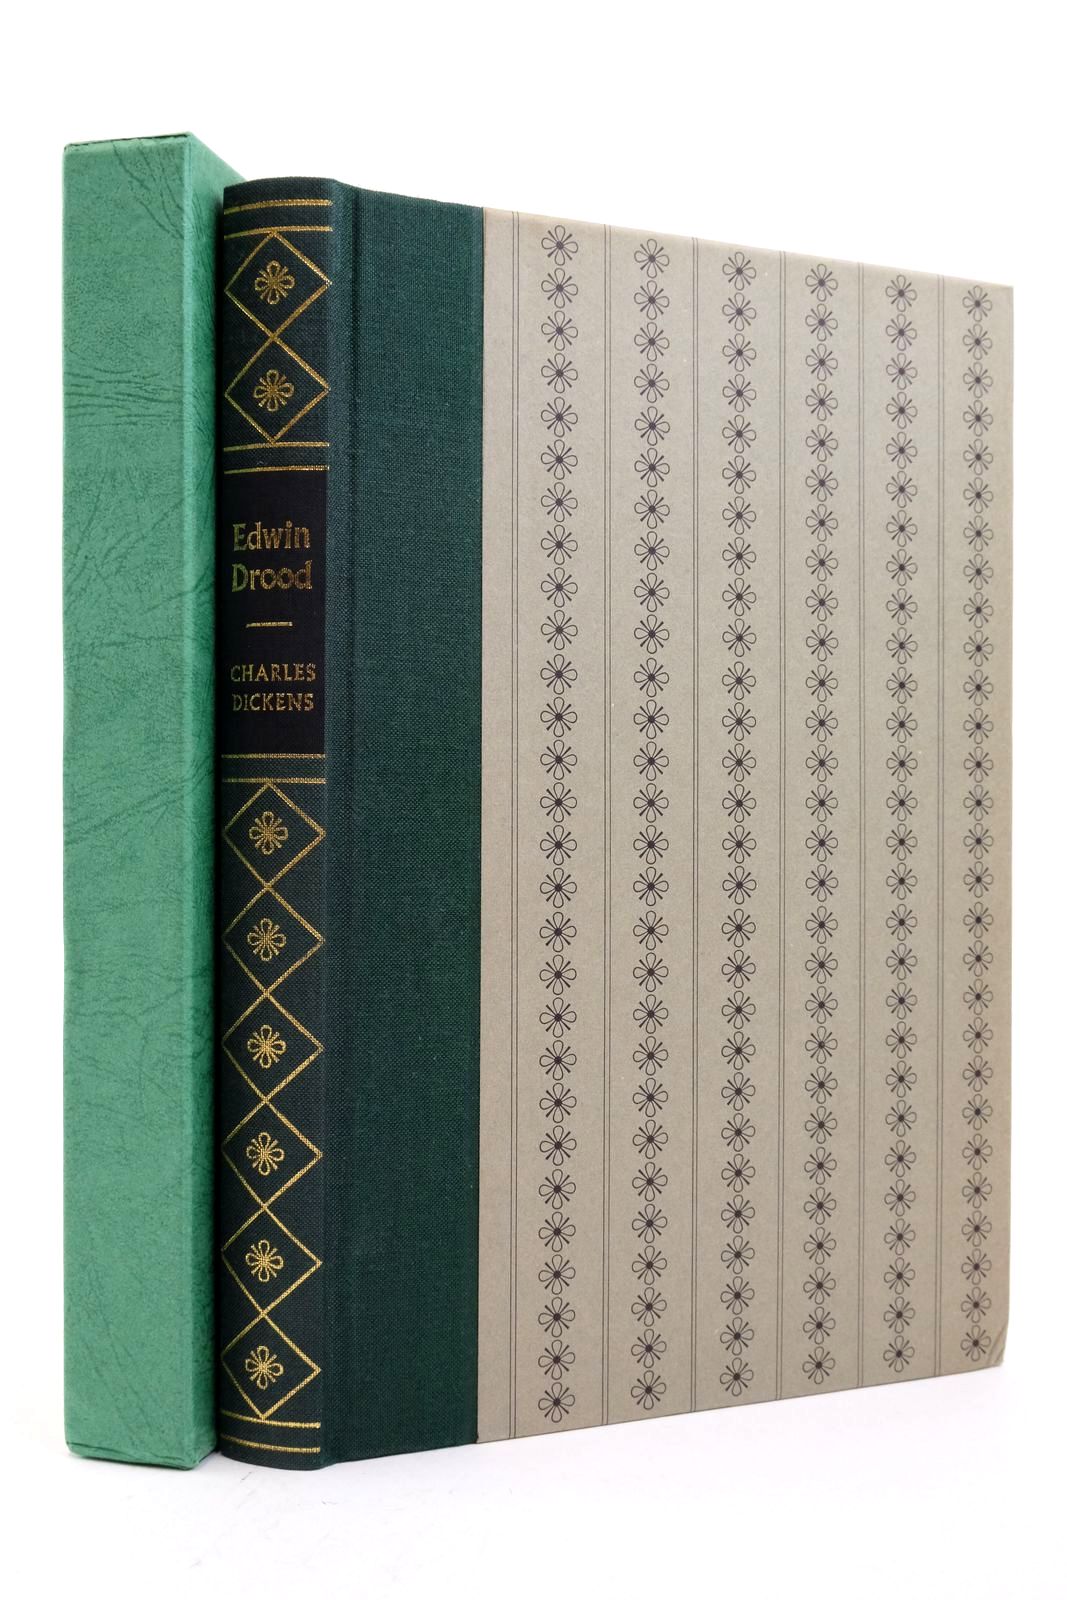 Photo of THE MYSTERY OF EDWIN DROOD written by Dickens, Charles illustrated by Keeping, Charles published by Folio Society (STOCK CODE: 2138511)  for sale by Stella & Rose's Books